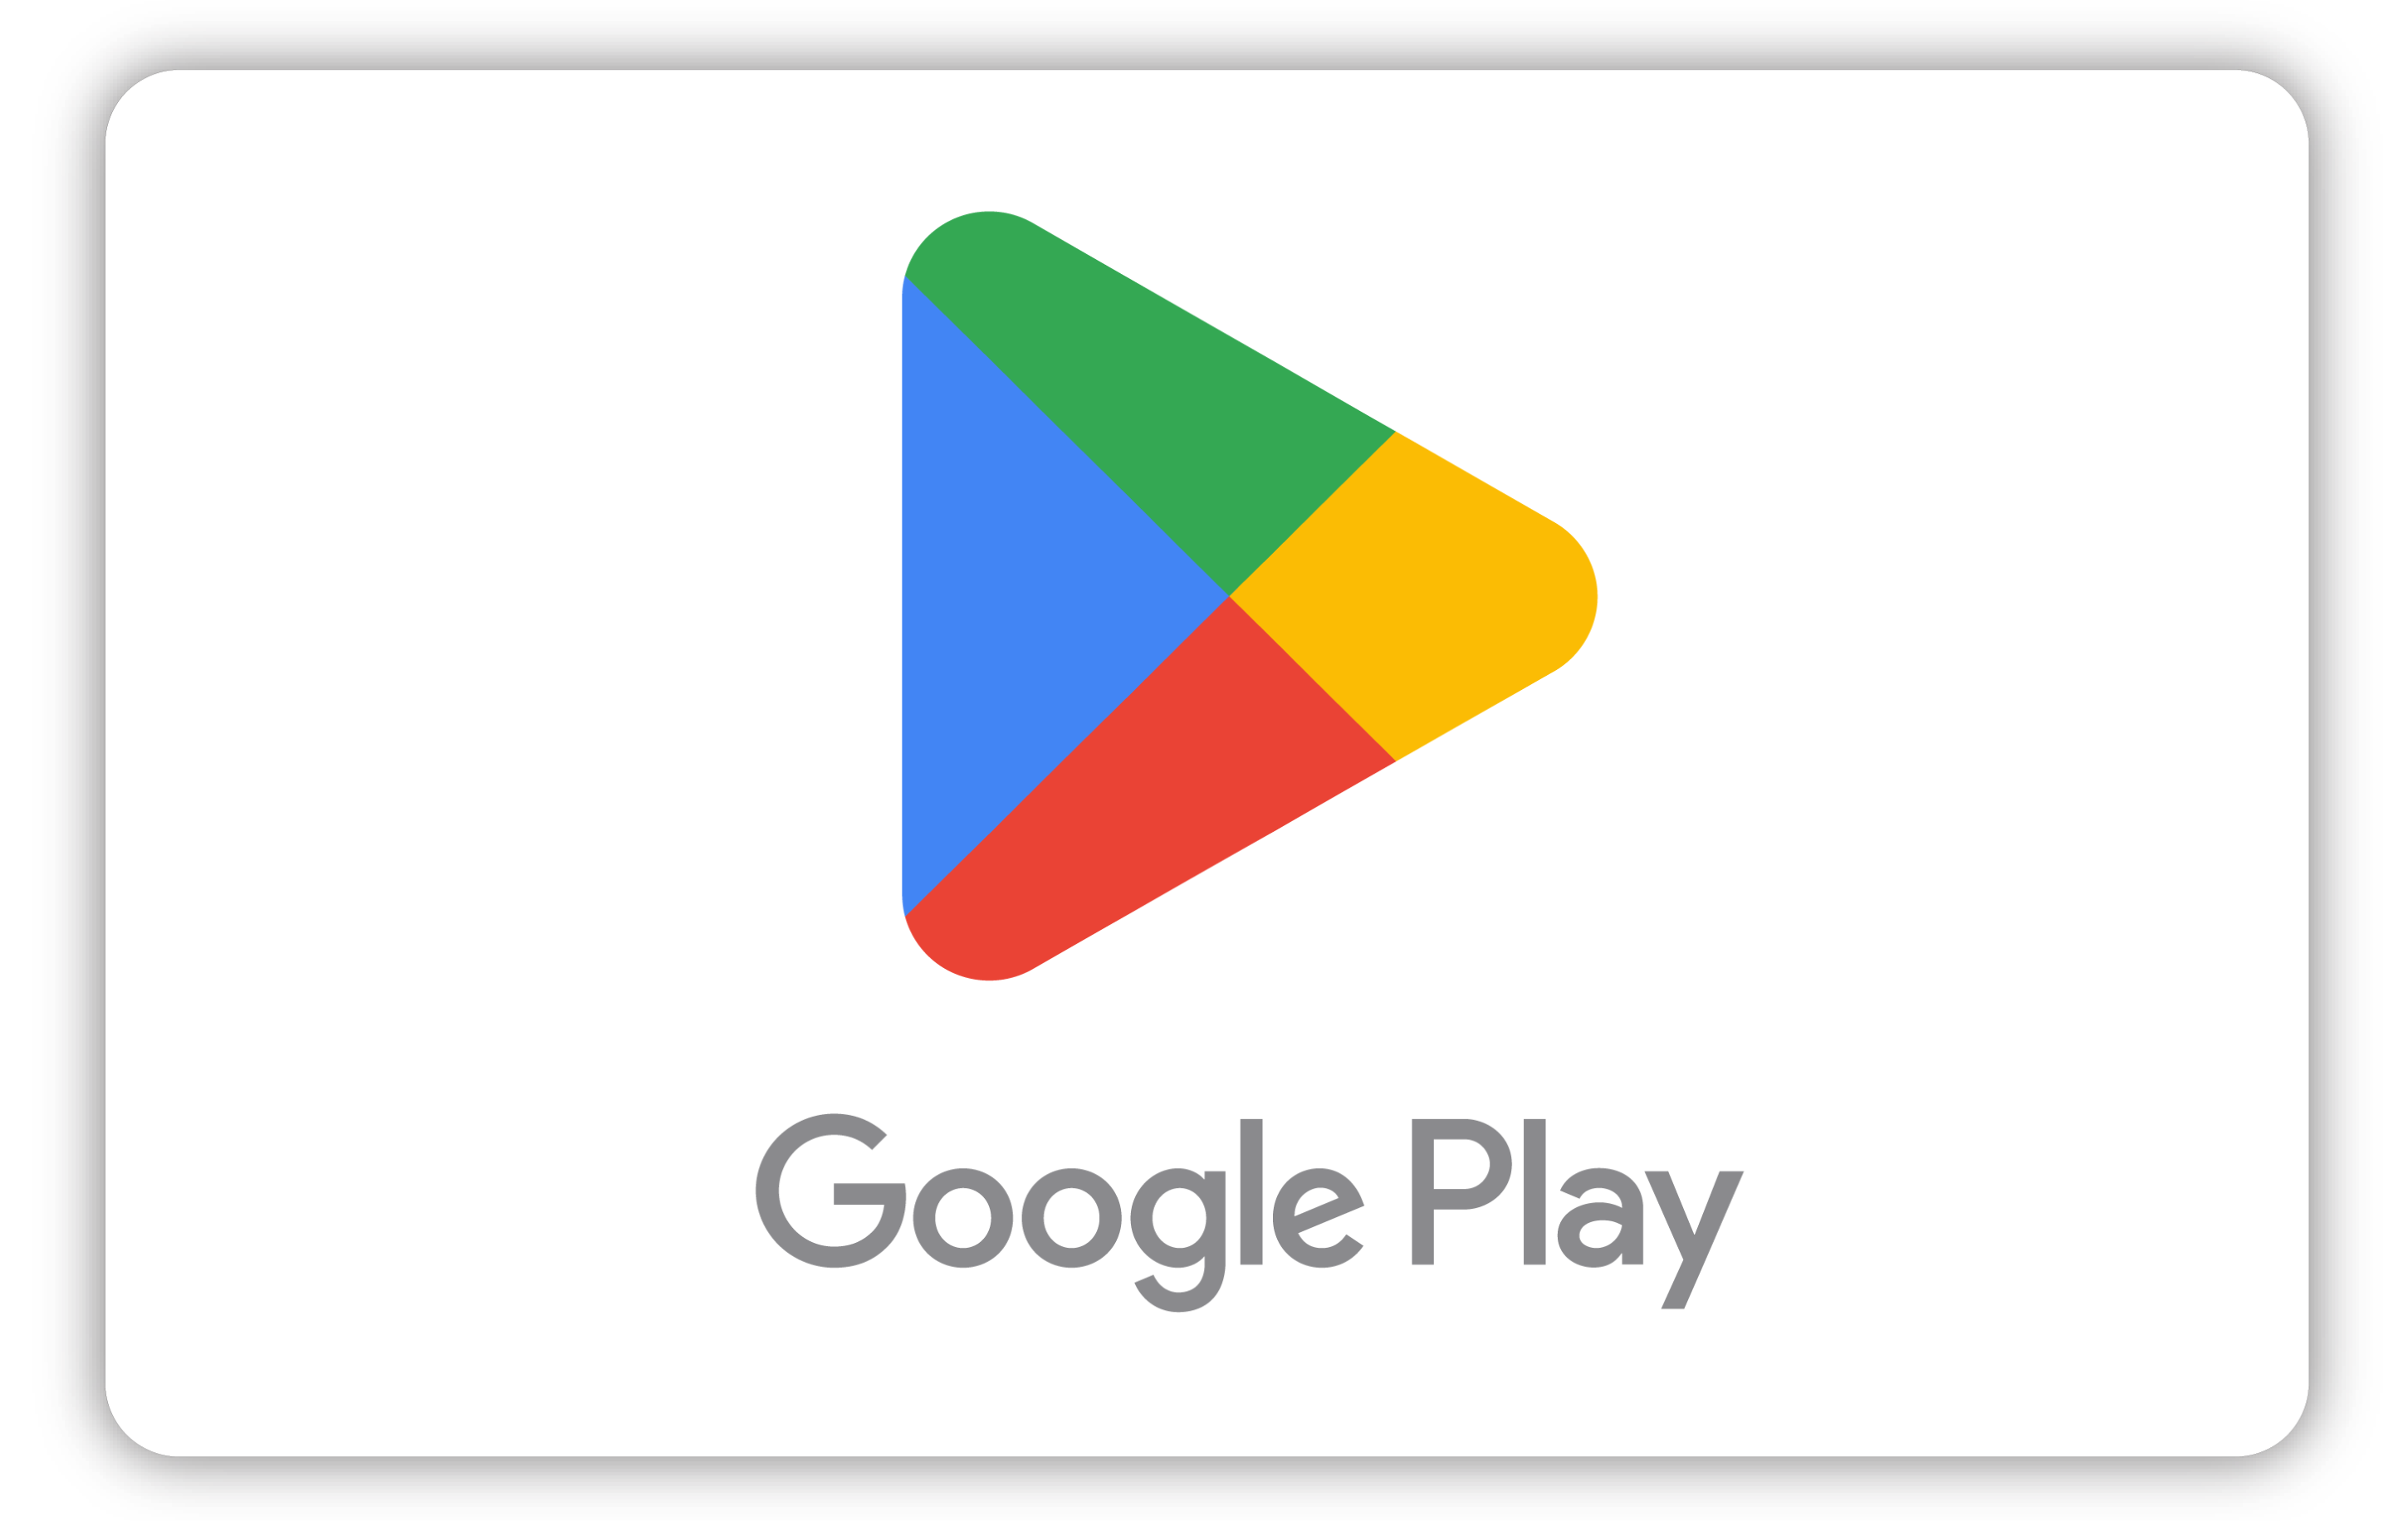 Google Play 200 Gift Card (Email Delivery - Limit 2 codes per order) 